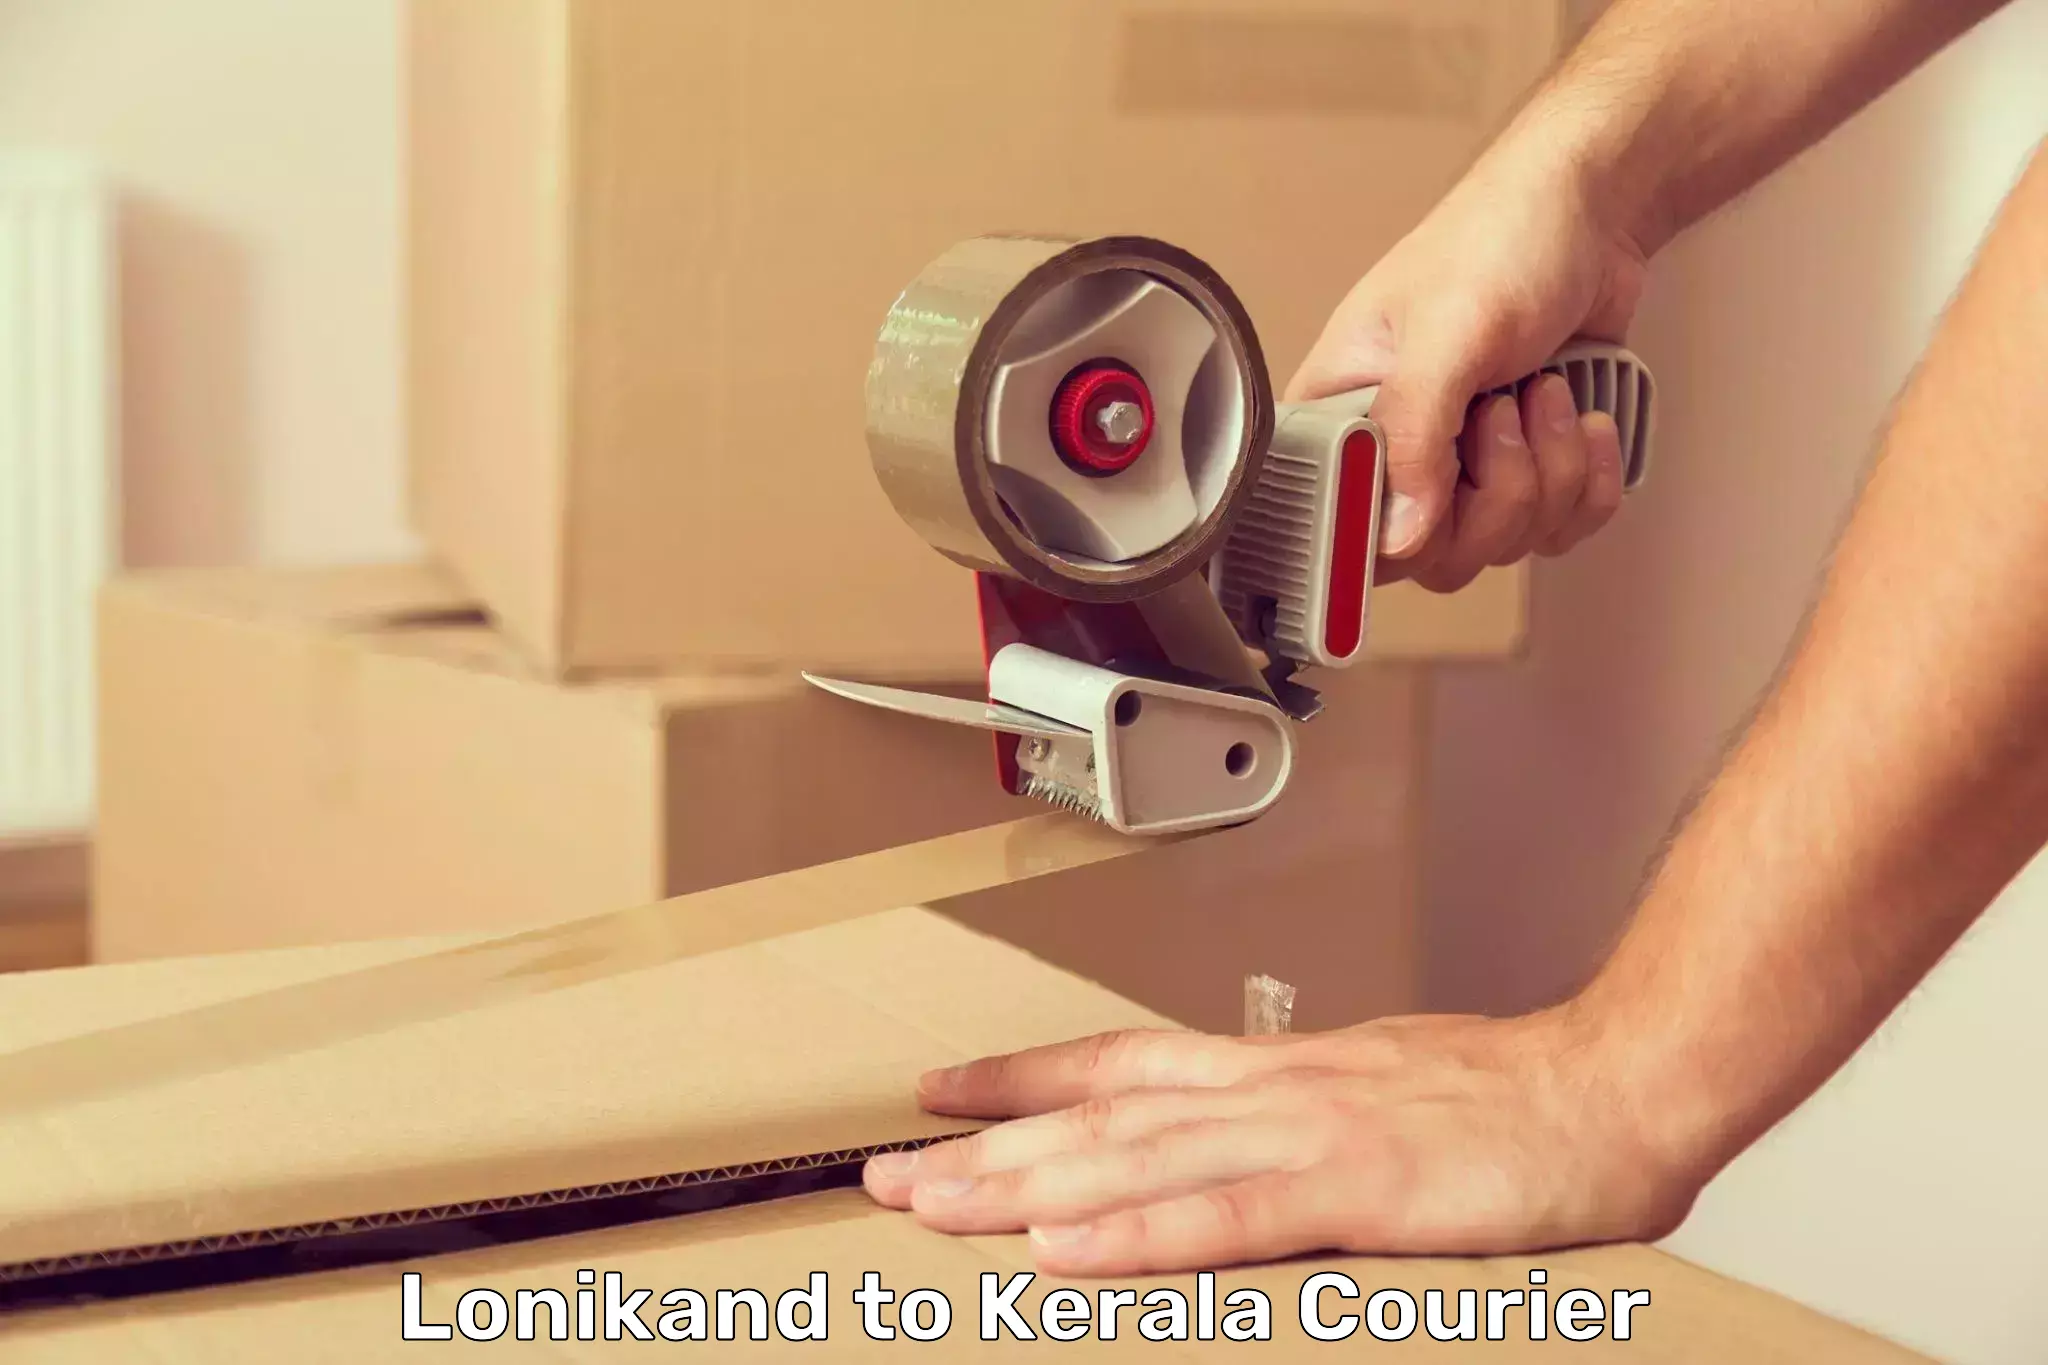 Online package tracking in Lonikand to Kerala